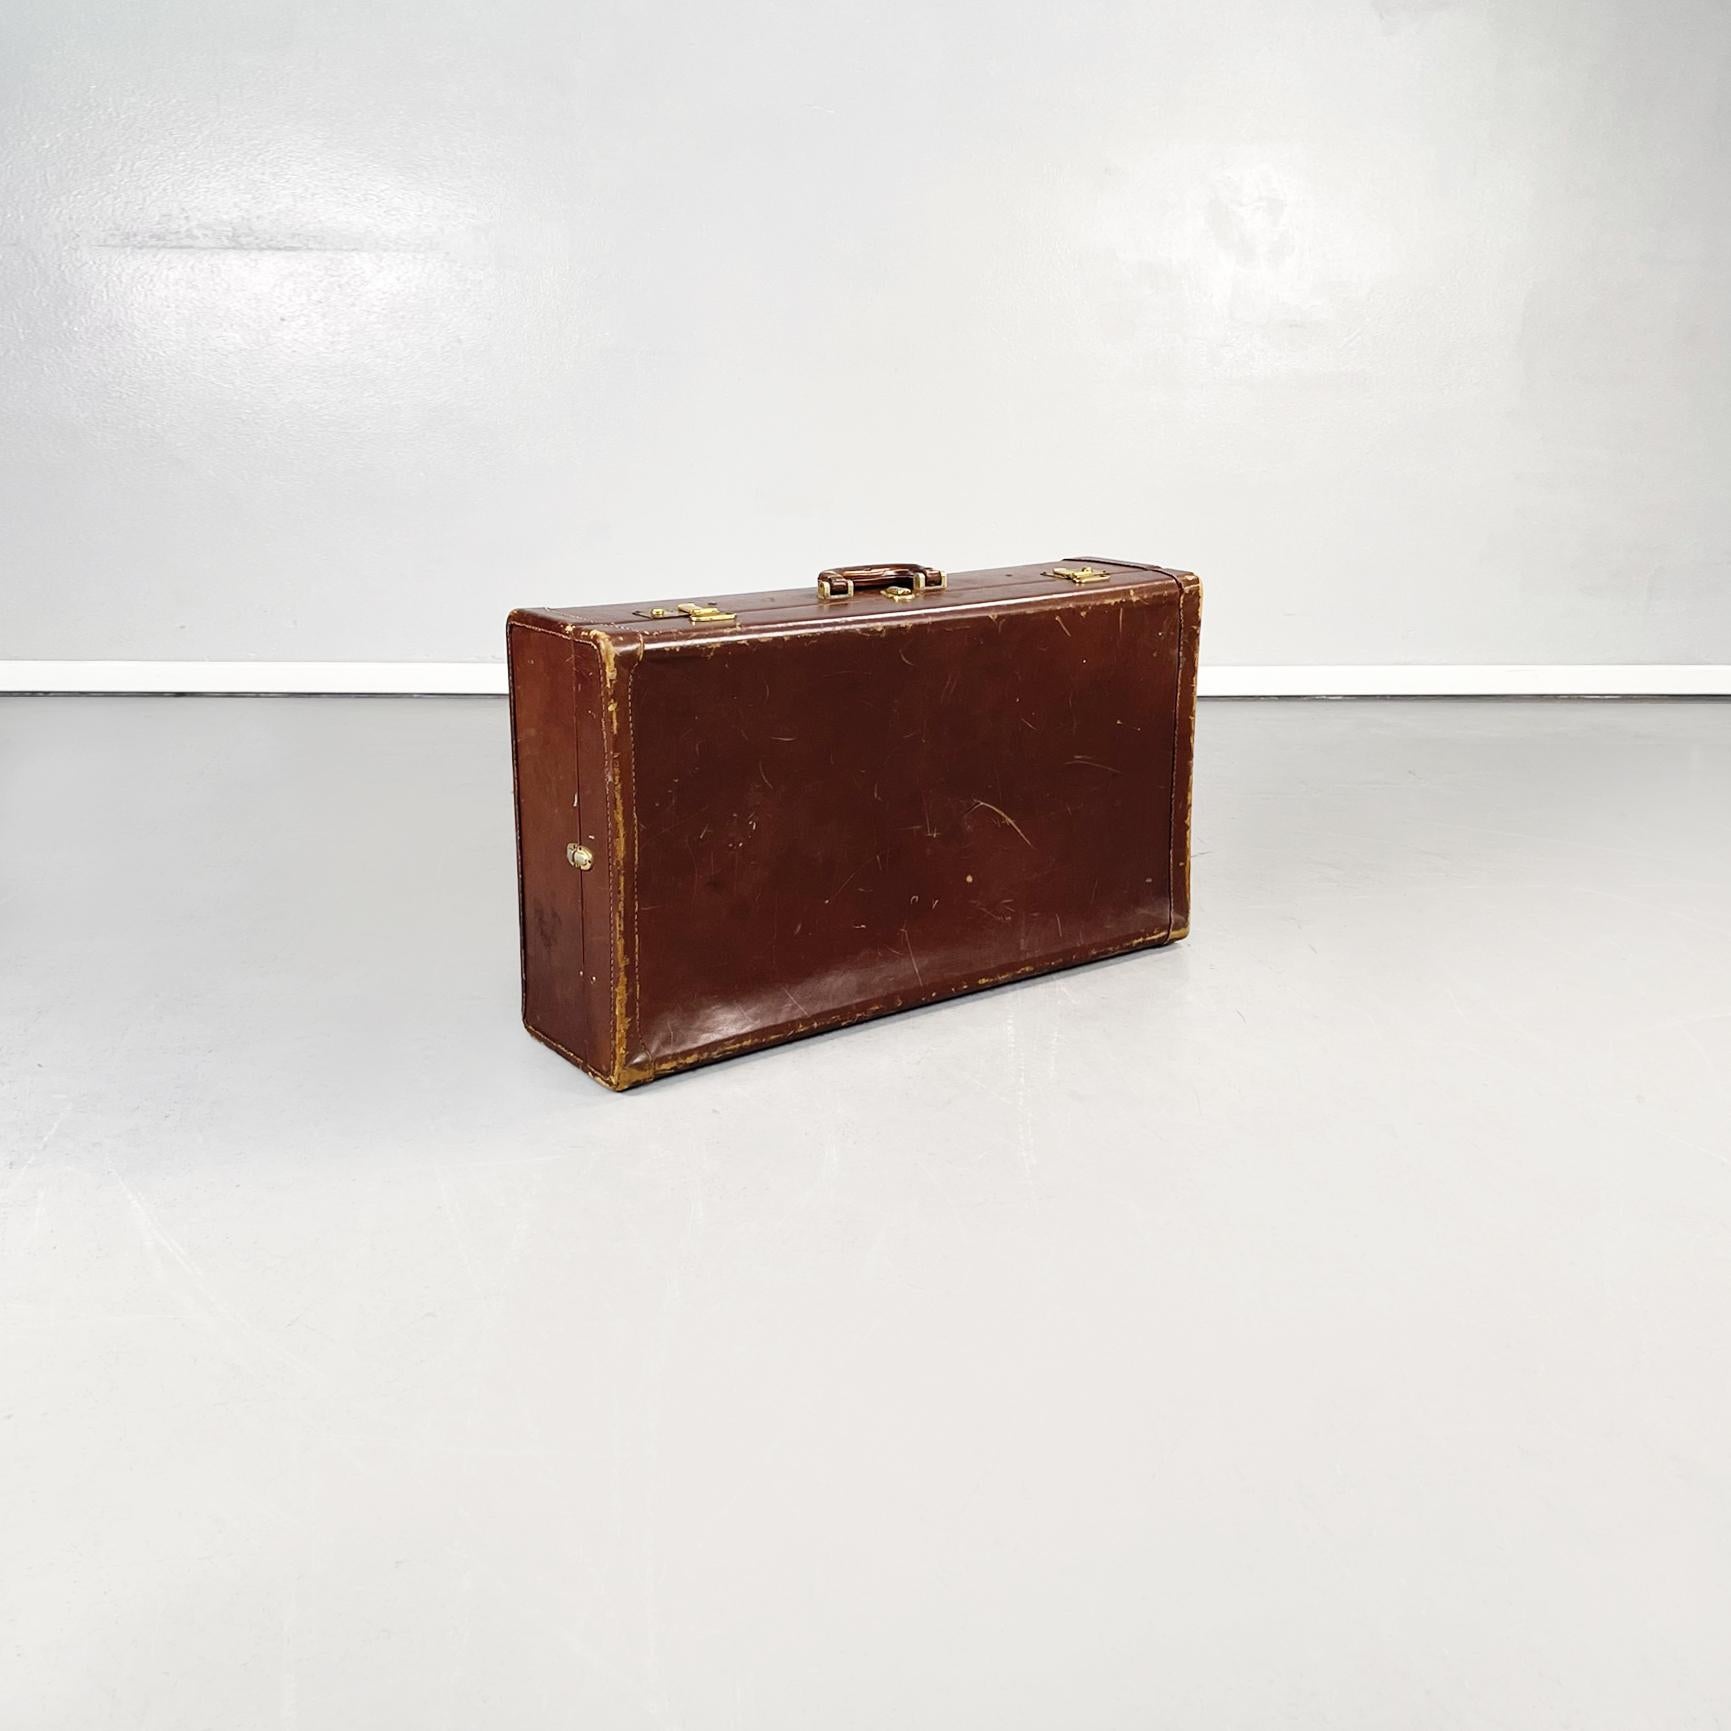 Italian Mid-Century Modern luggage in brown leather with beige fabric, 1970s.
Rectangular suitcase in brown leather. Brass closure, handle present. Beige fabric interior with two elastic pockets and thin brown leather straps. Suitable as a